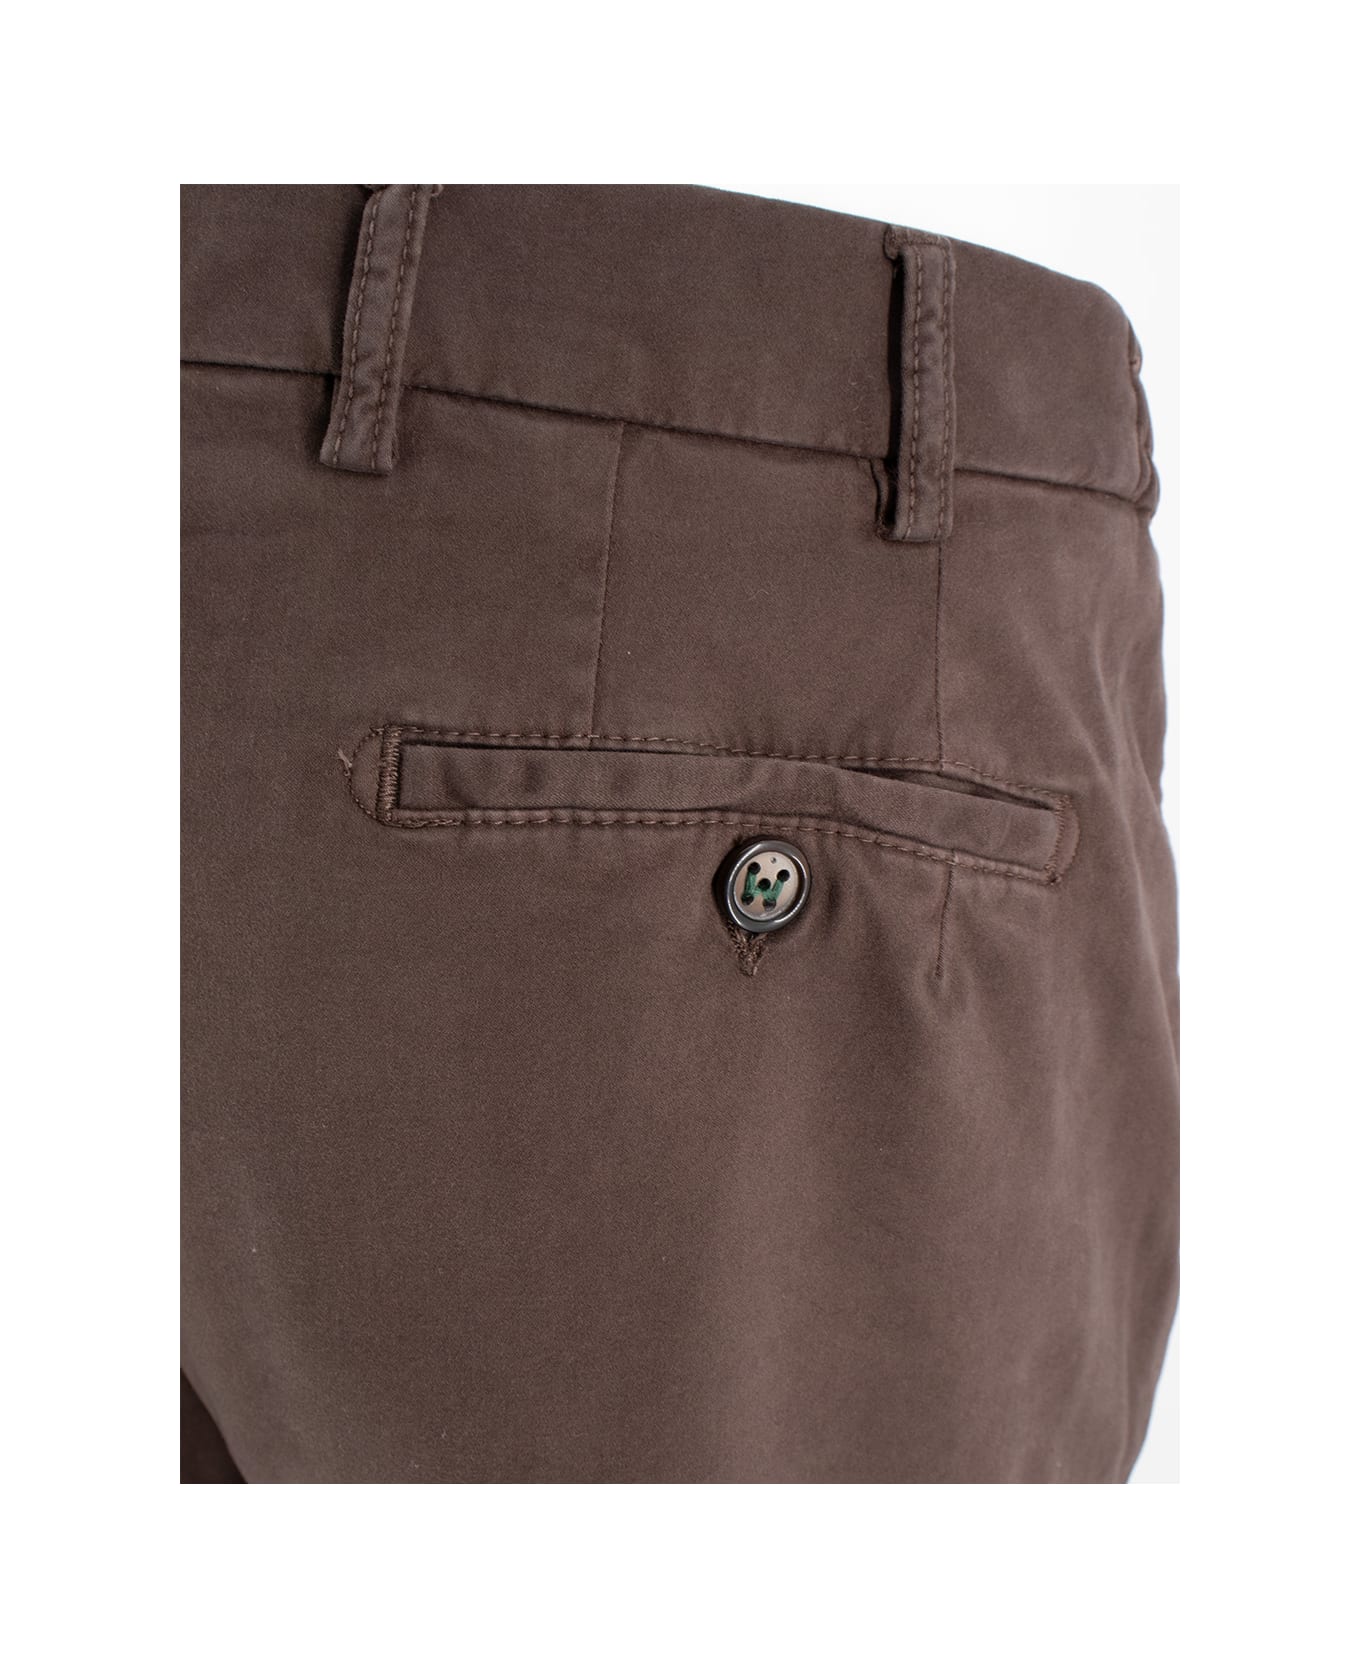 Berwich Trousers - BROWN   ボトムス